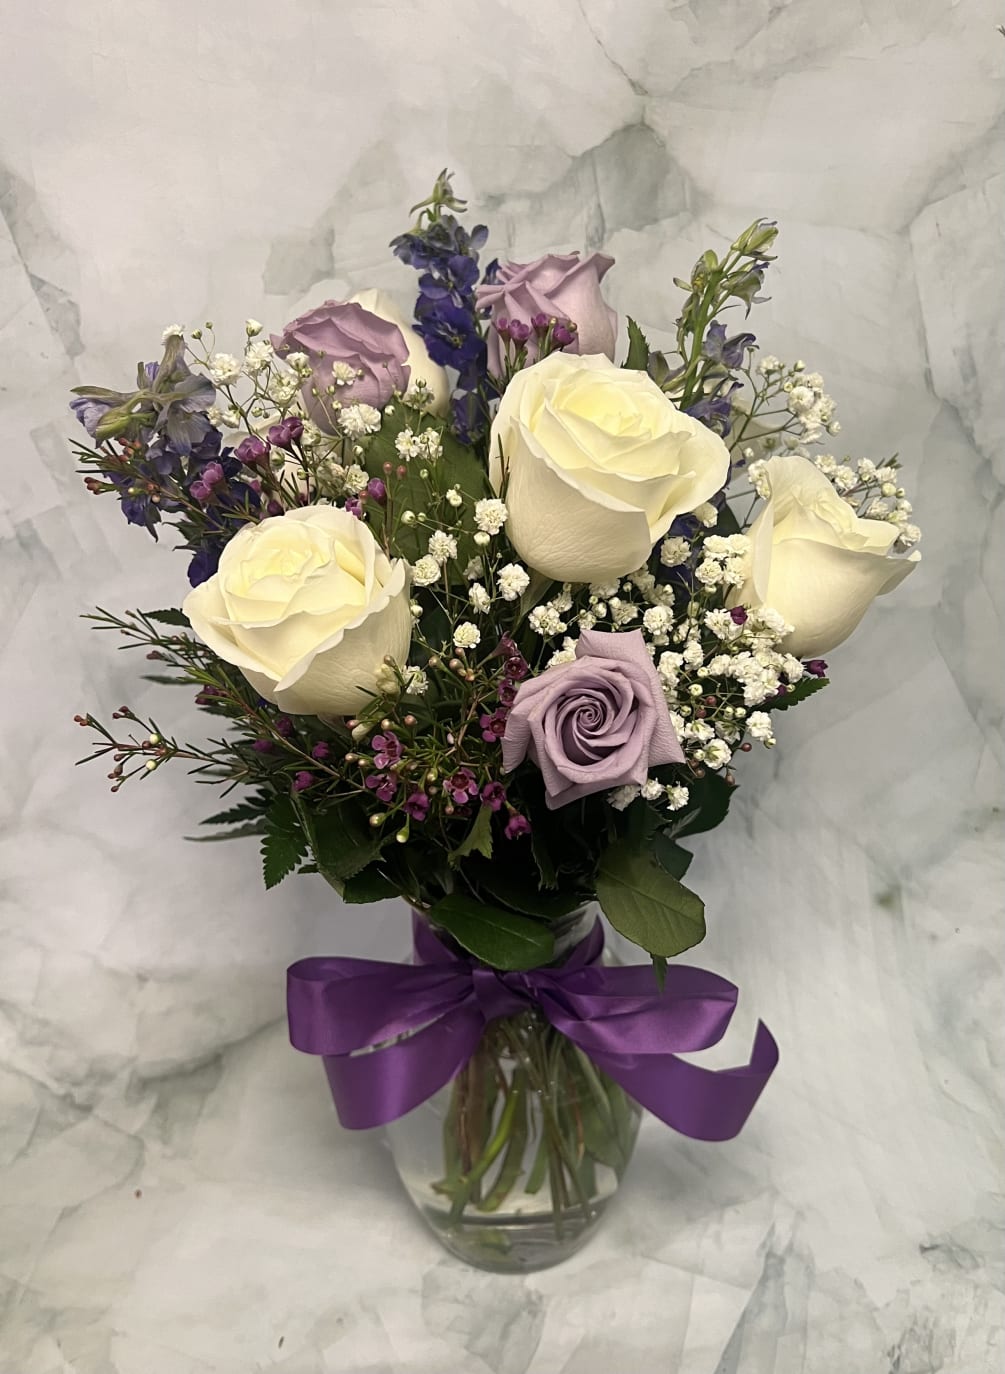 This lavender white arrangement is perfect for all occasions. Whether it is